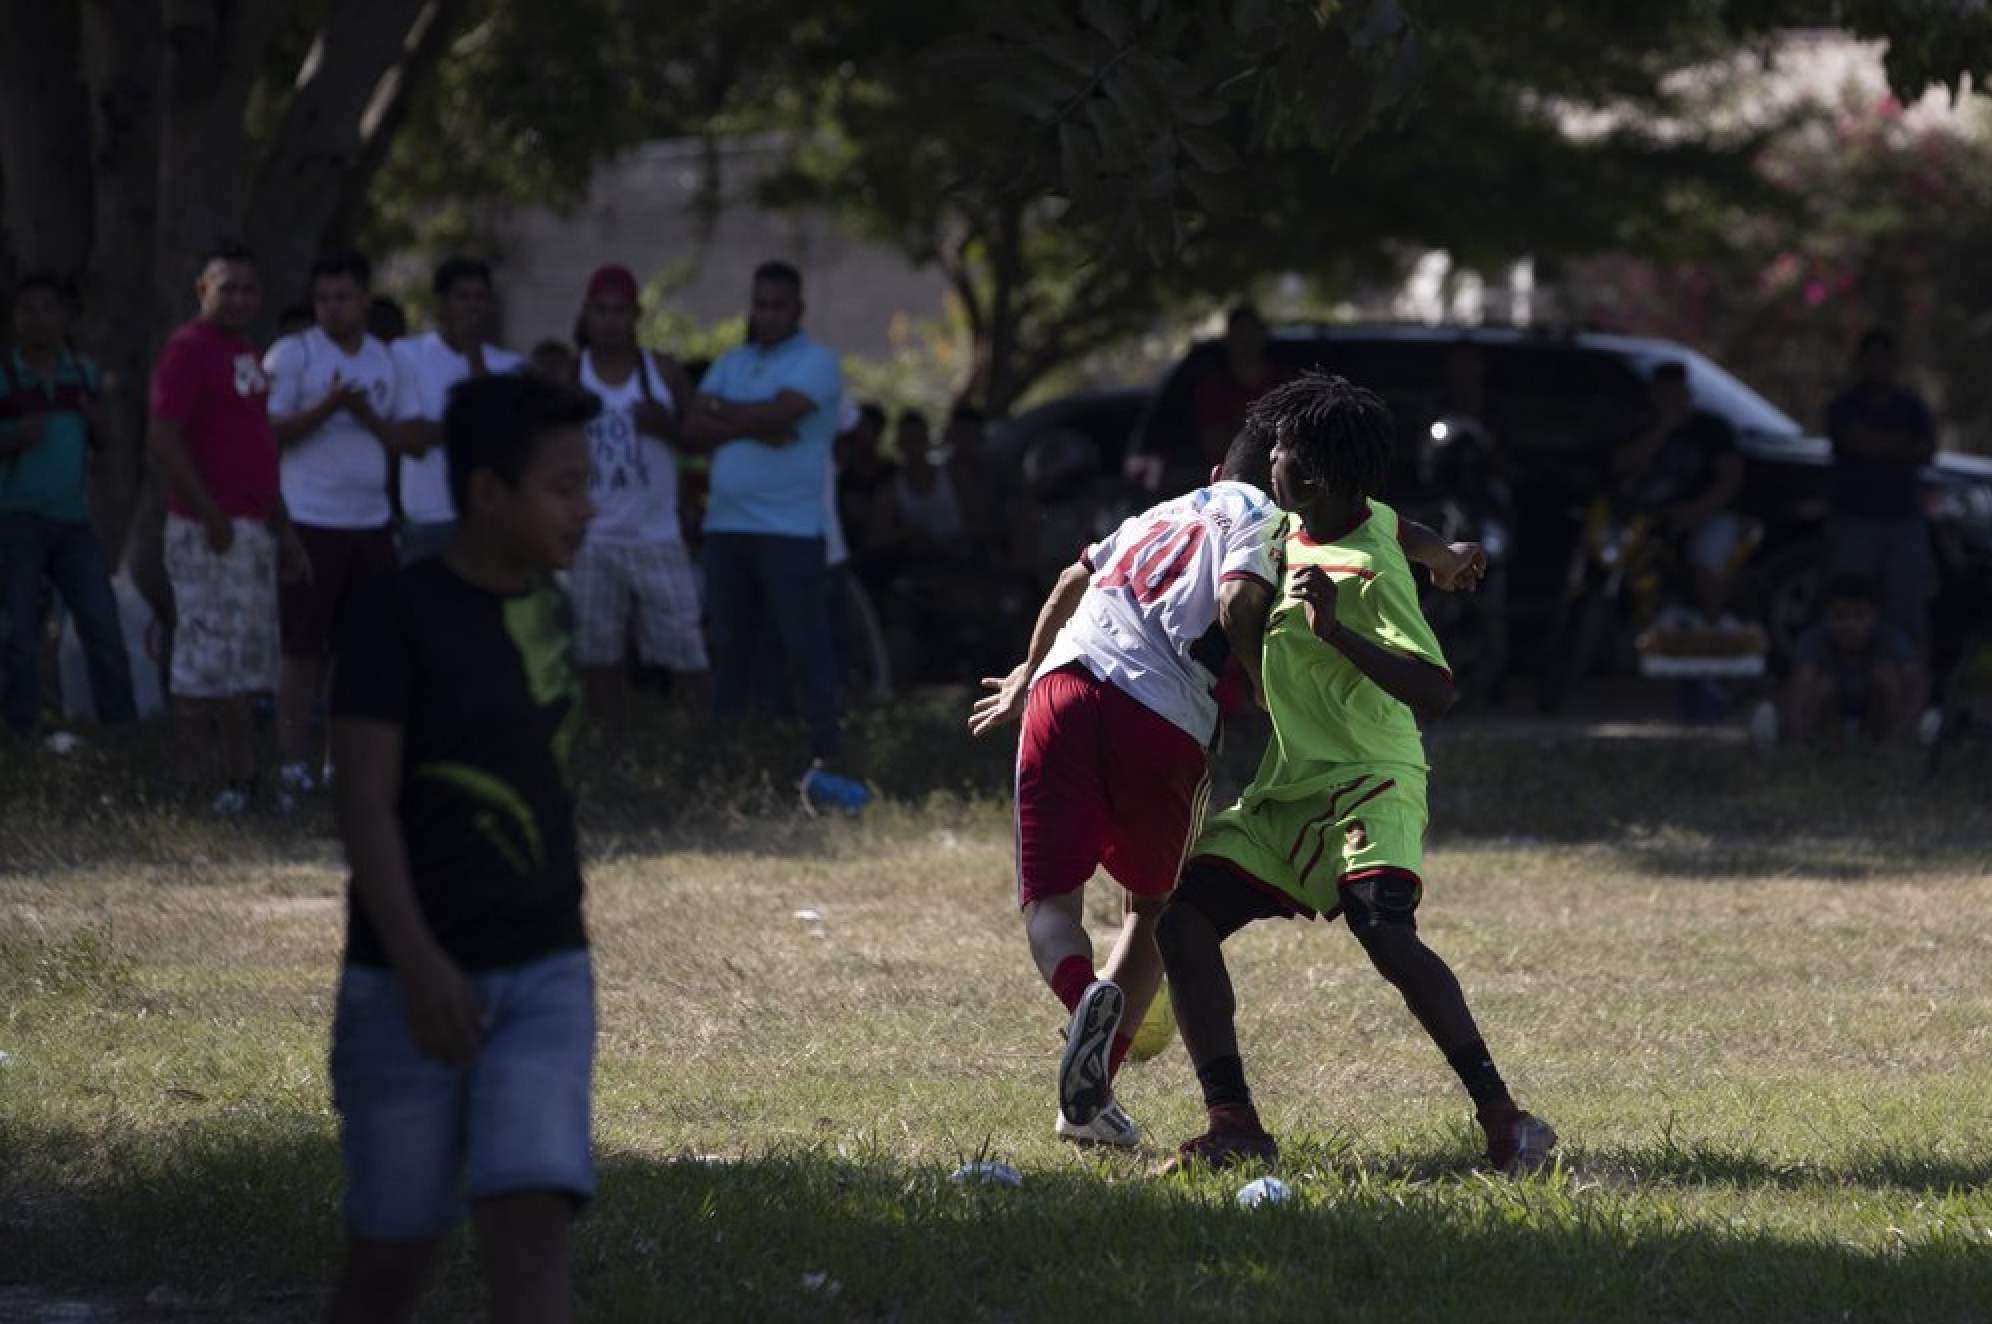 Players from a taxi drivers' team, center left, and a gang members' team vie for the soccer ball during a game in the Rivera Hernandez neighborhood of San Pedro Sula, Honduras, on Dec. 1, 2019. With the help of neighbors, an evangelical pastor organized a zone of tolerance in the field where 14 people were killed in 2010, during an inter-gang battle for control of the area. Image by Moises Castillo/ AP Photo. Honduras, 2019.